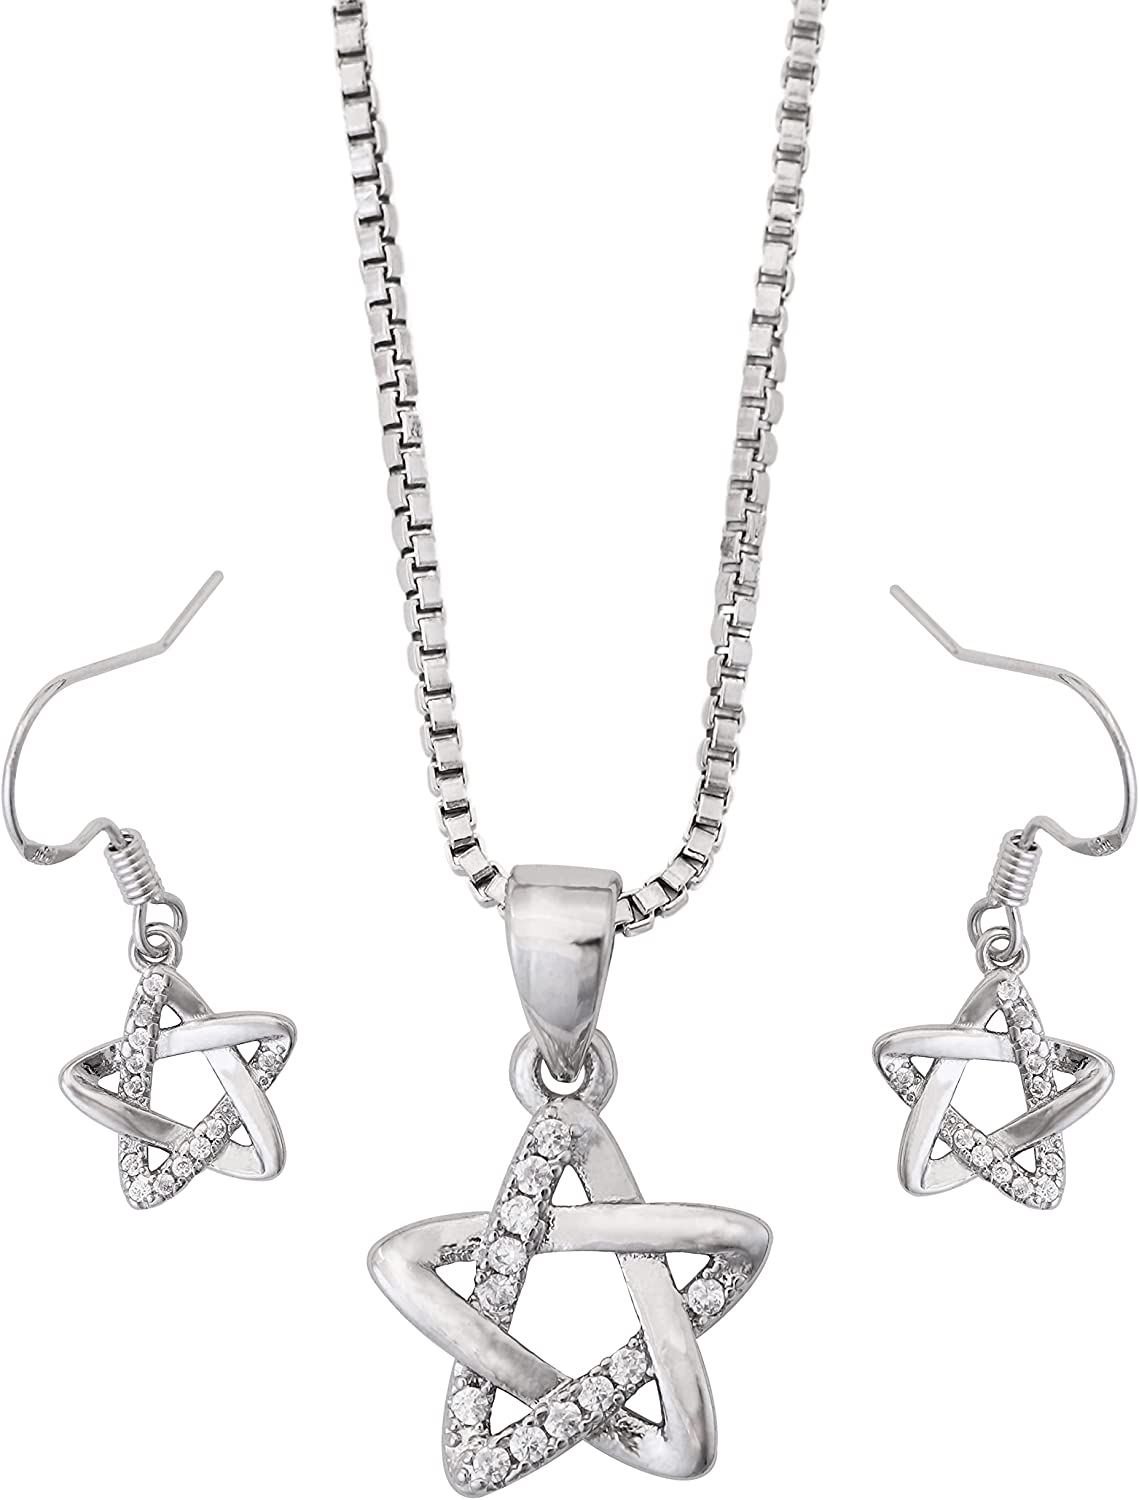 Vintage Star of David Jewelry Set Star Earrings Necklace, Silver Stainless Steel - Home Decor Gifts and More